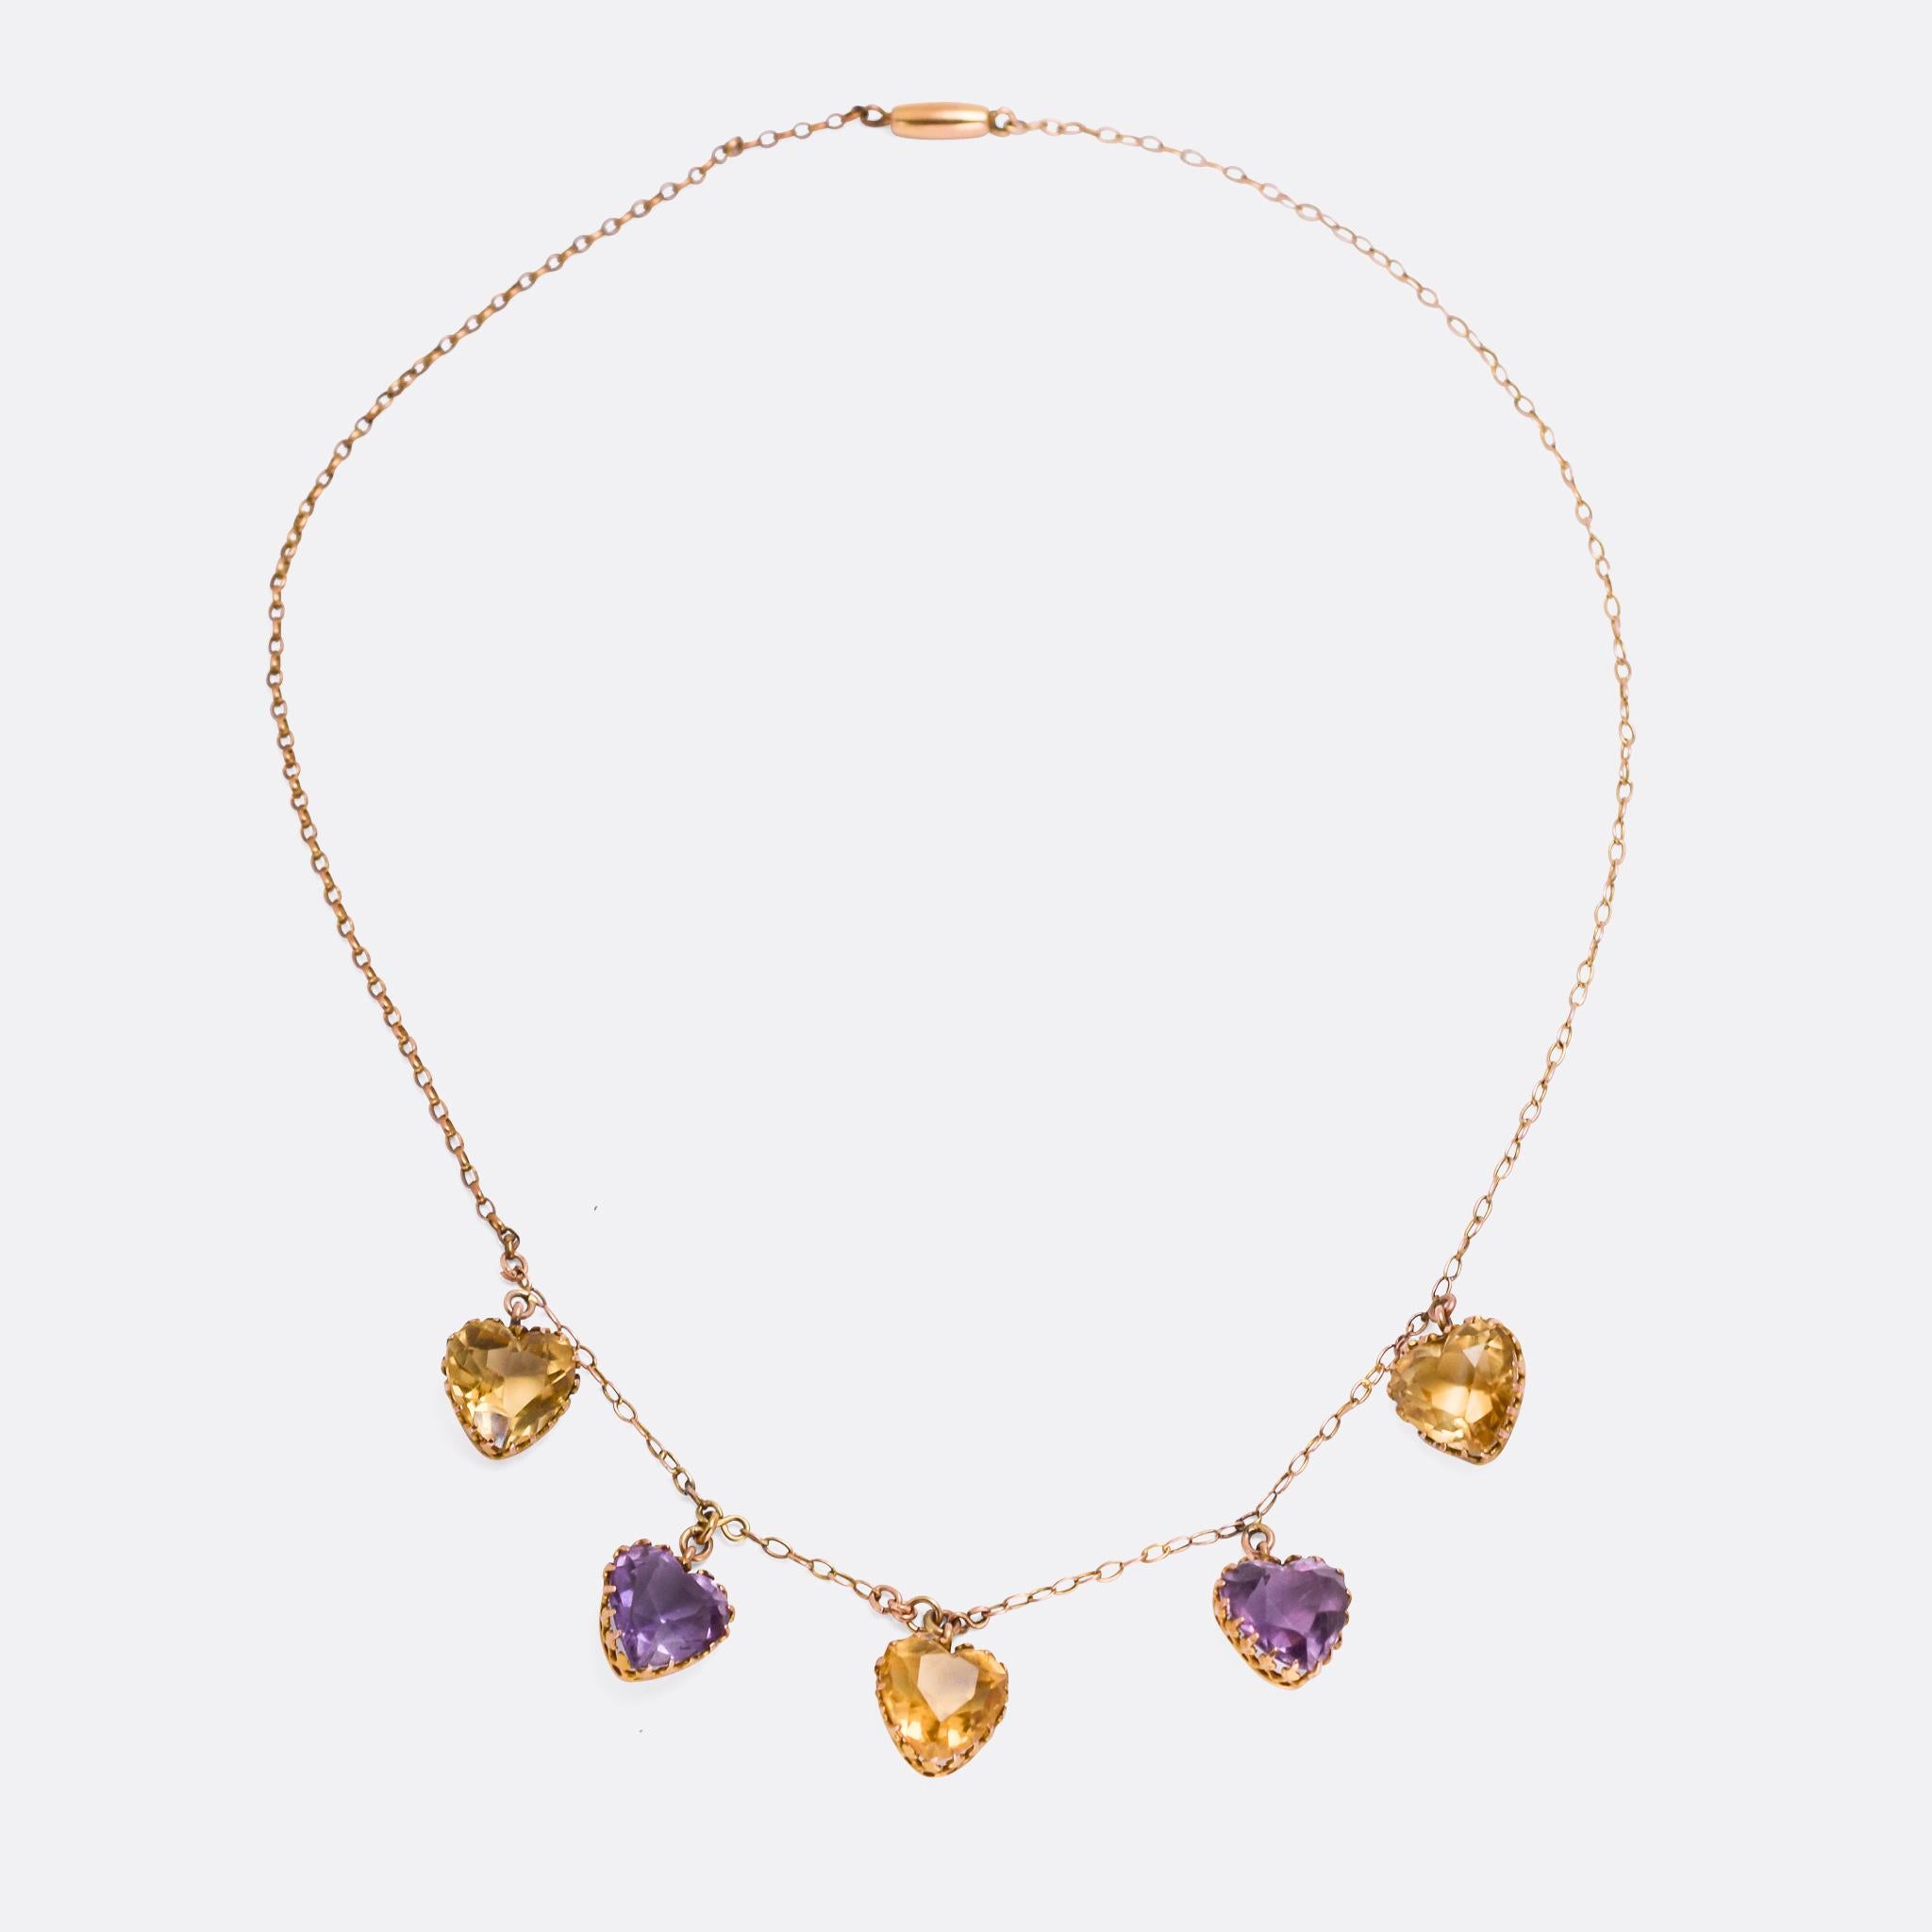 A lovely Victorian fringe necklace set with four heart shaped gemstones in fancy claw mounts: two amethyst and three citrine. It dates from the late 19th Century, modelled in 9 karat gold, and the colour palate is just sublime.

STONES 
Natural